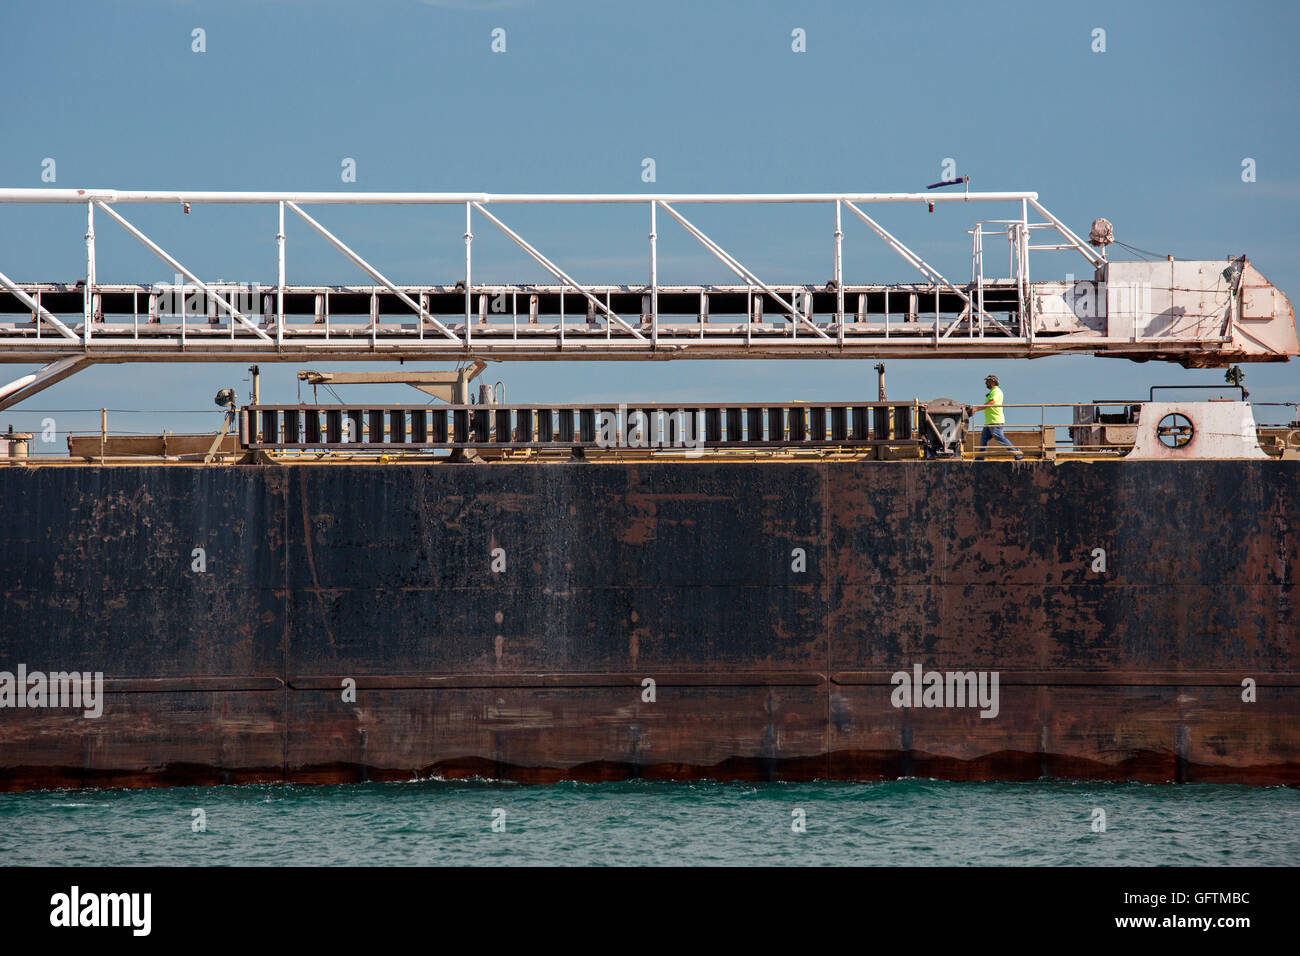 Detroit, Michigan - A crew member walks on the deck of the American Mariner bulk carrier sailing on the Detroit River. Stock Photo